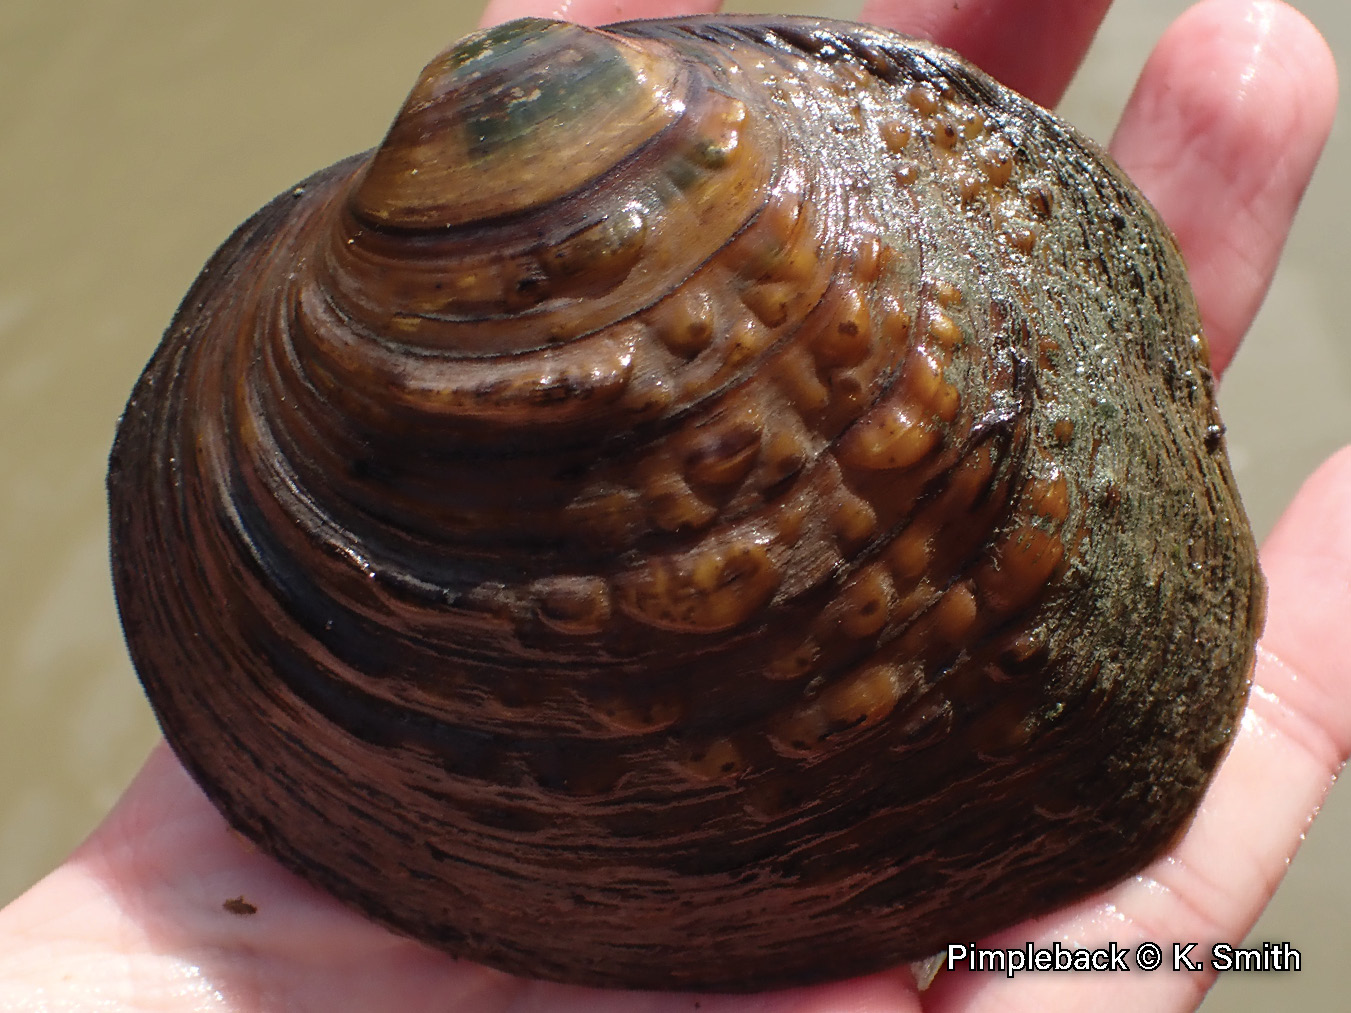 Picture of a Pimpleback mussel in a hand, a brown, medium-sized mussel that is irregularly covered in bumps with a broad green ray on its beak